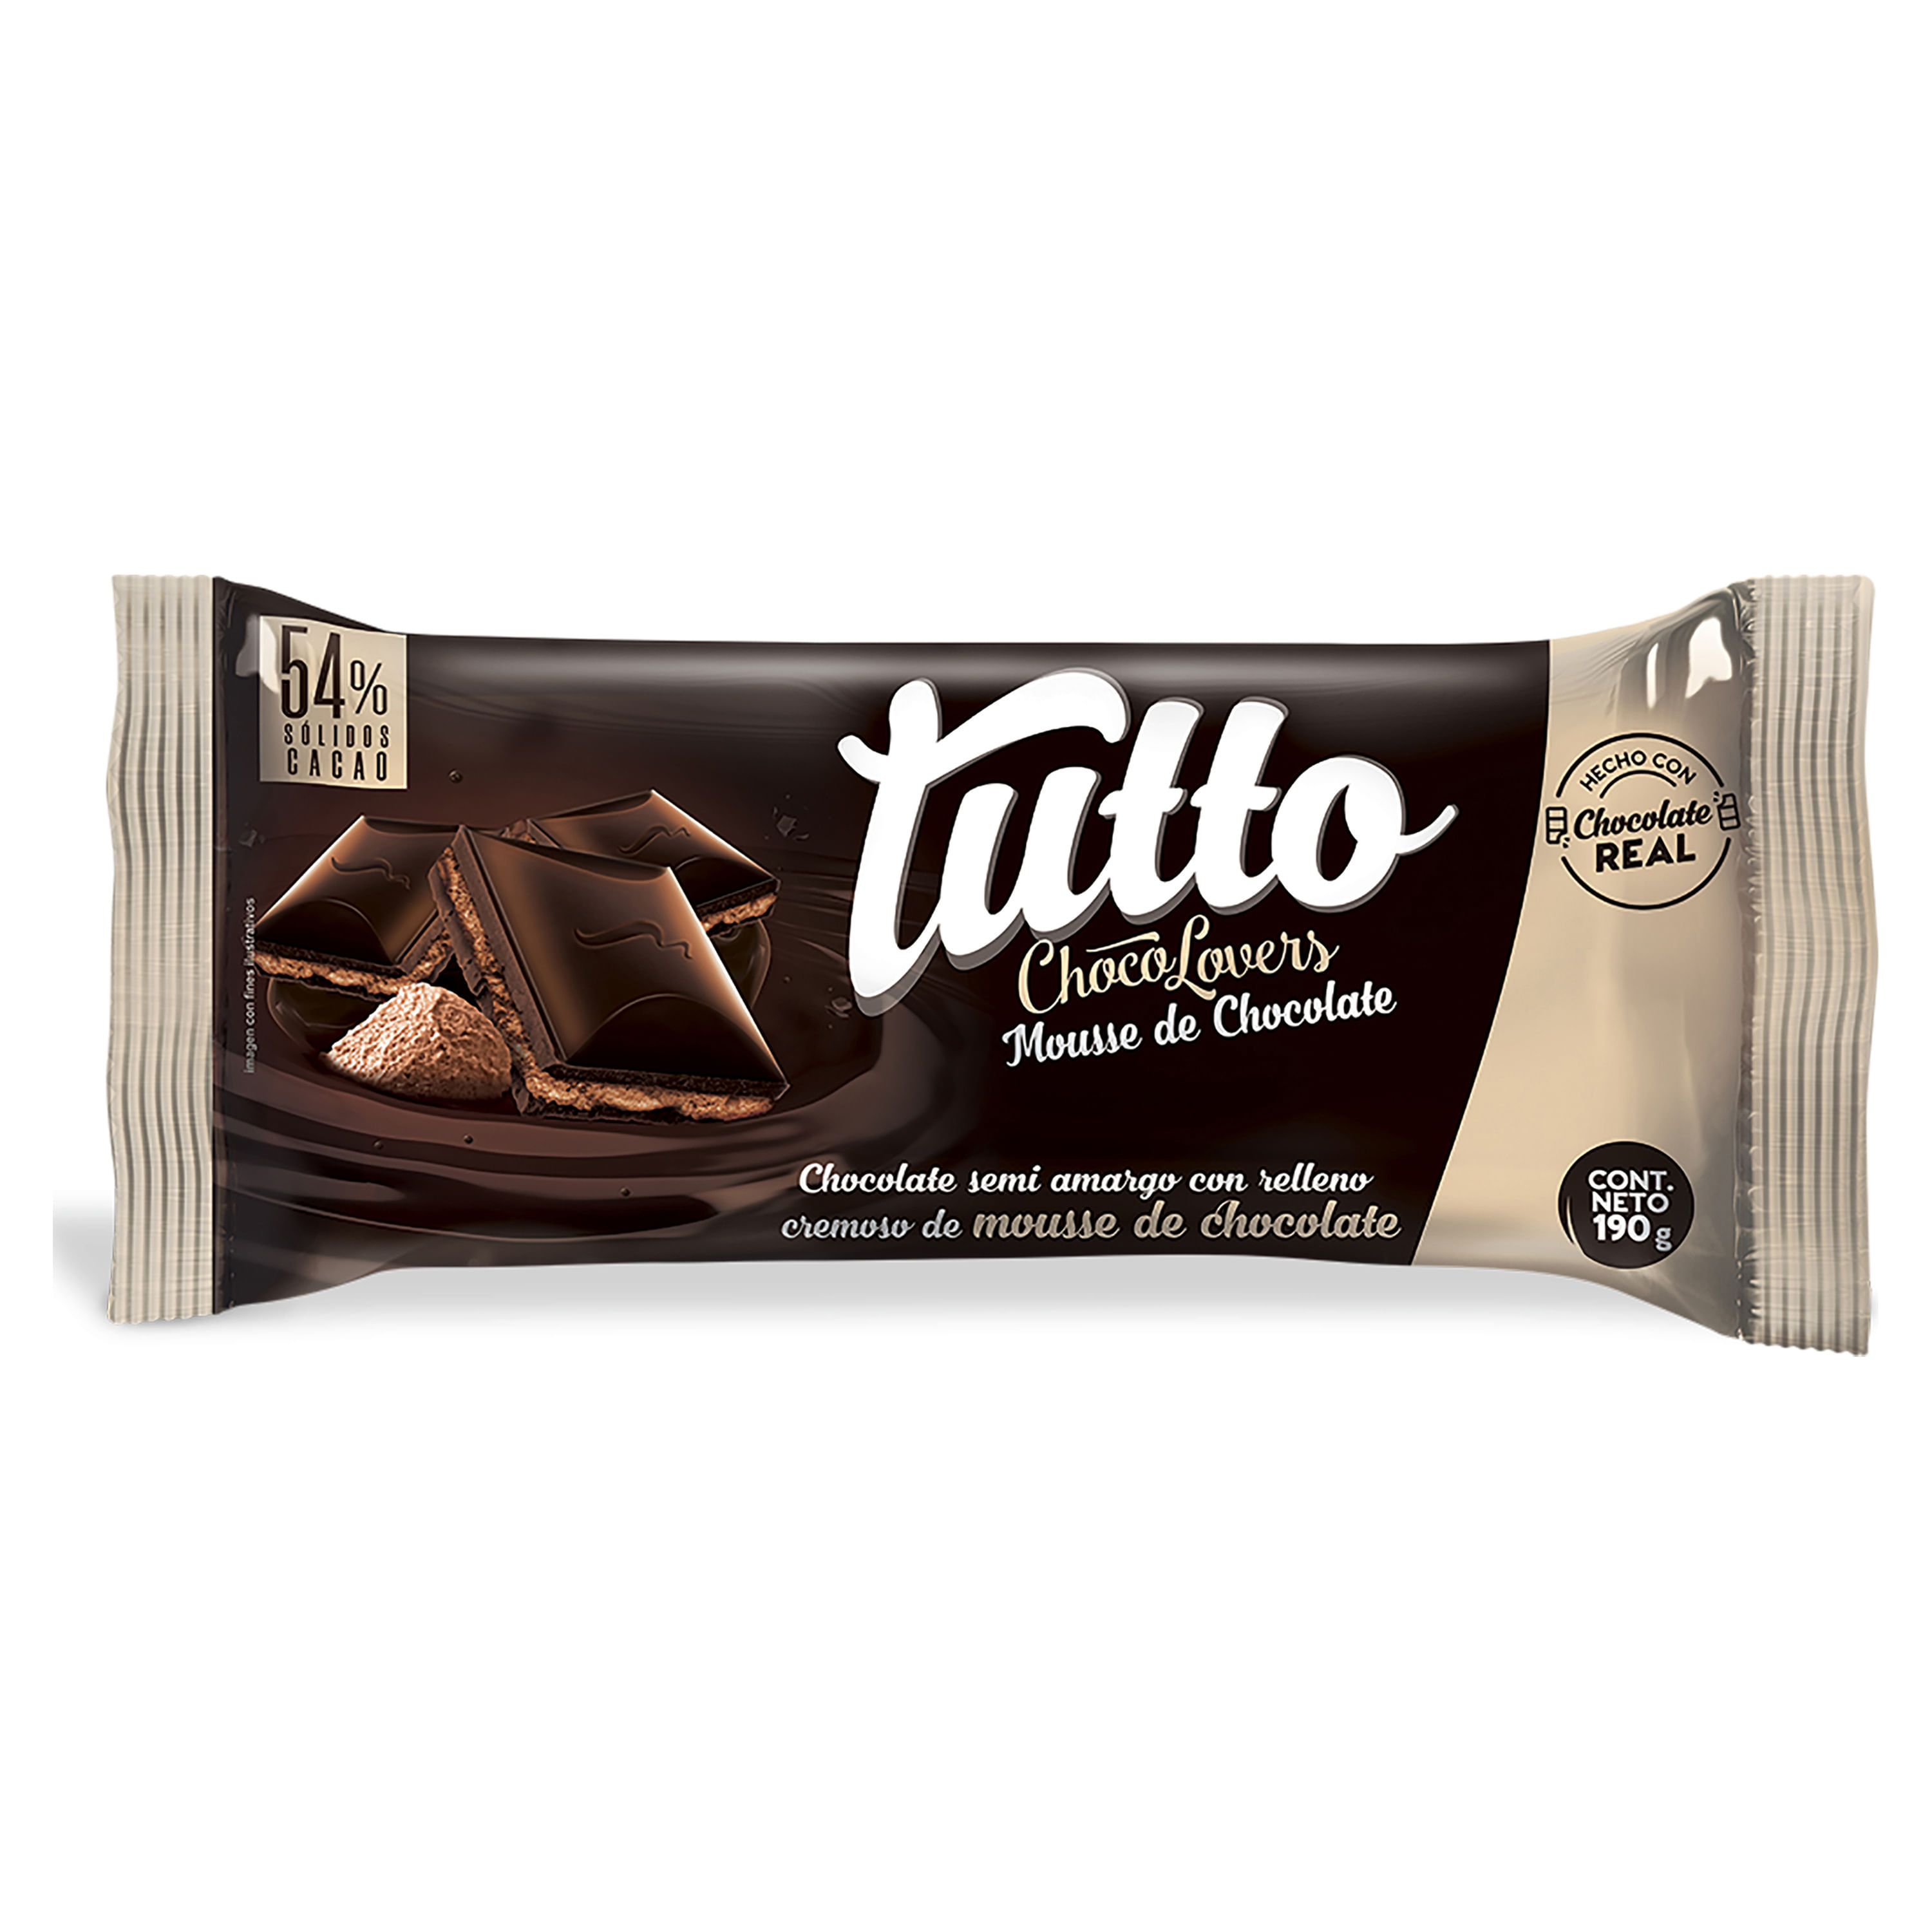 Chocolate-Tutto-Mousse-190G-1-70033